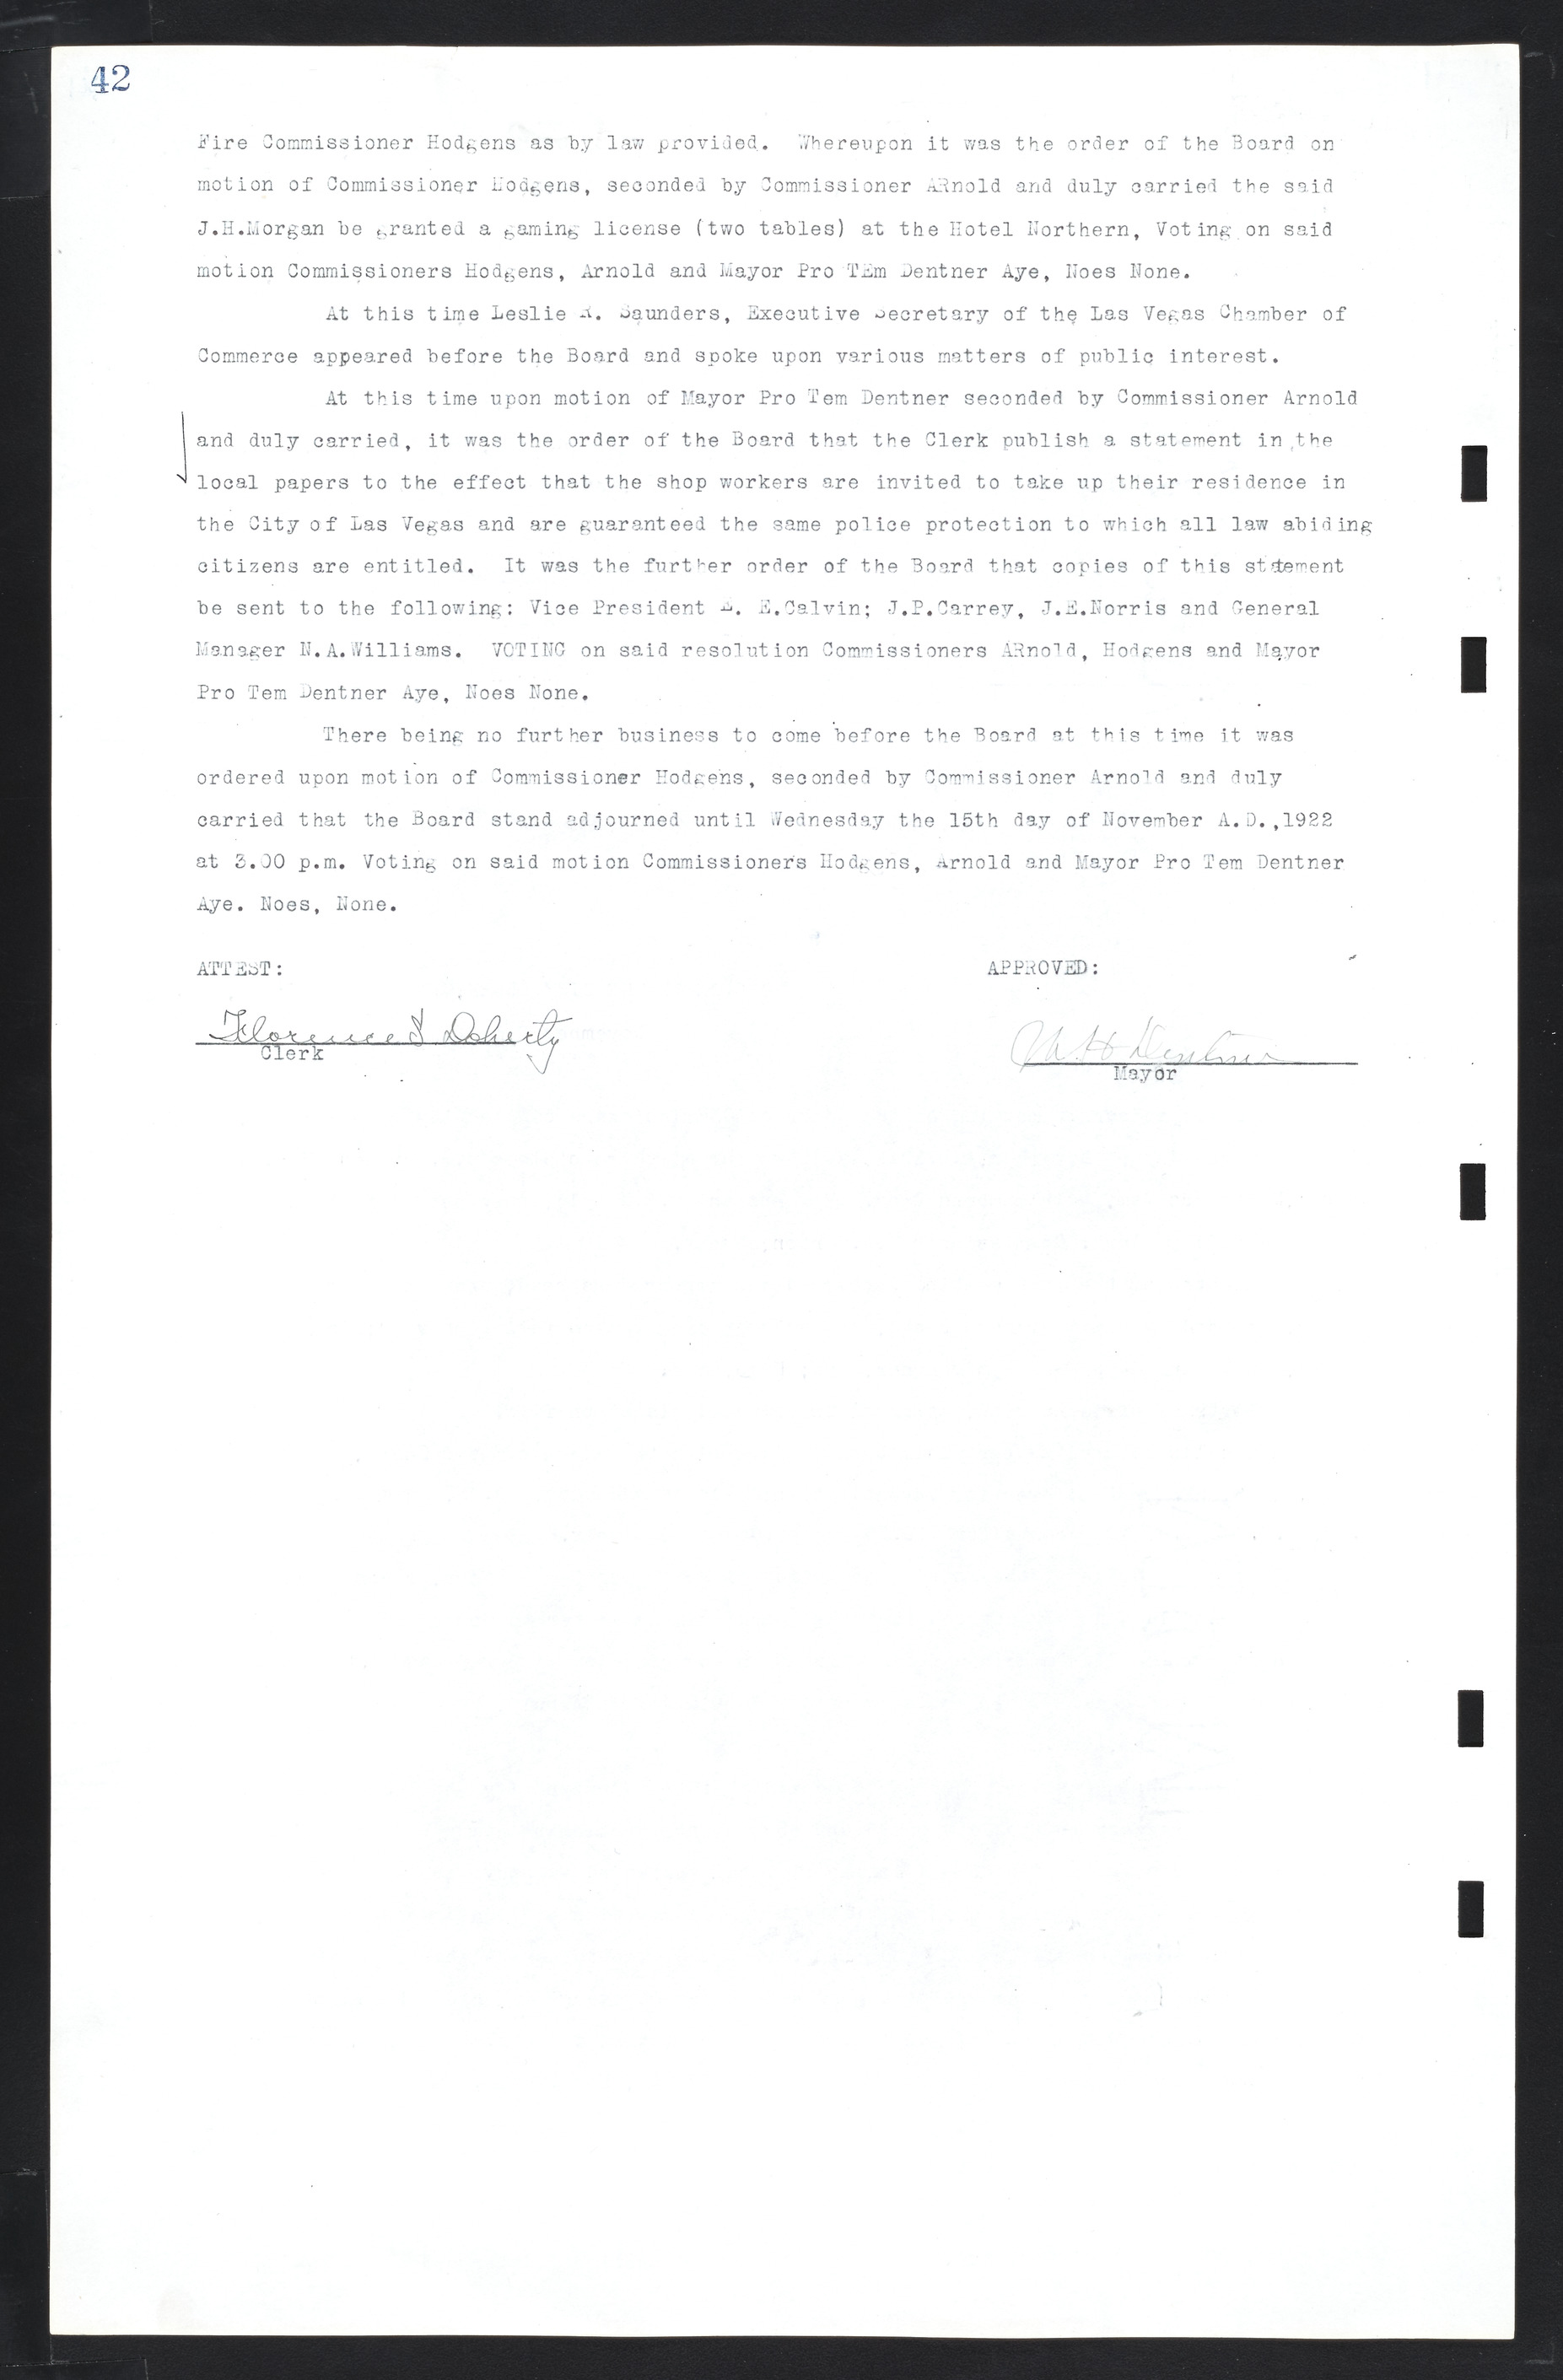 Las Vegas City Commission Minutes, March 1, 1922 to May 10, 1929, lvc000002-49